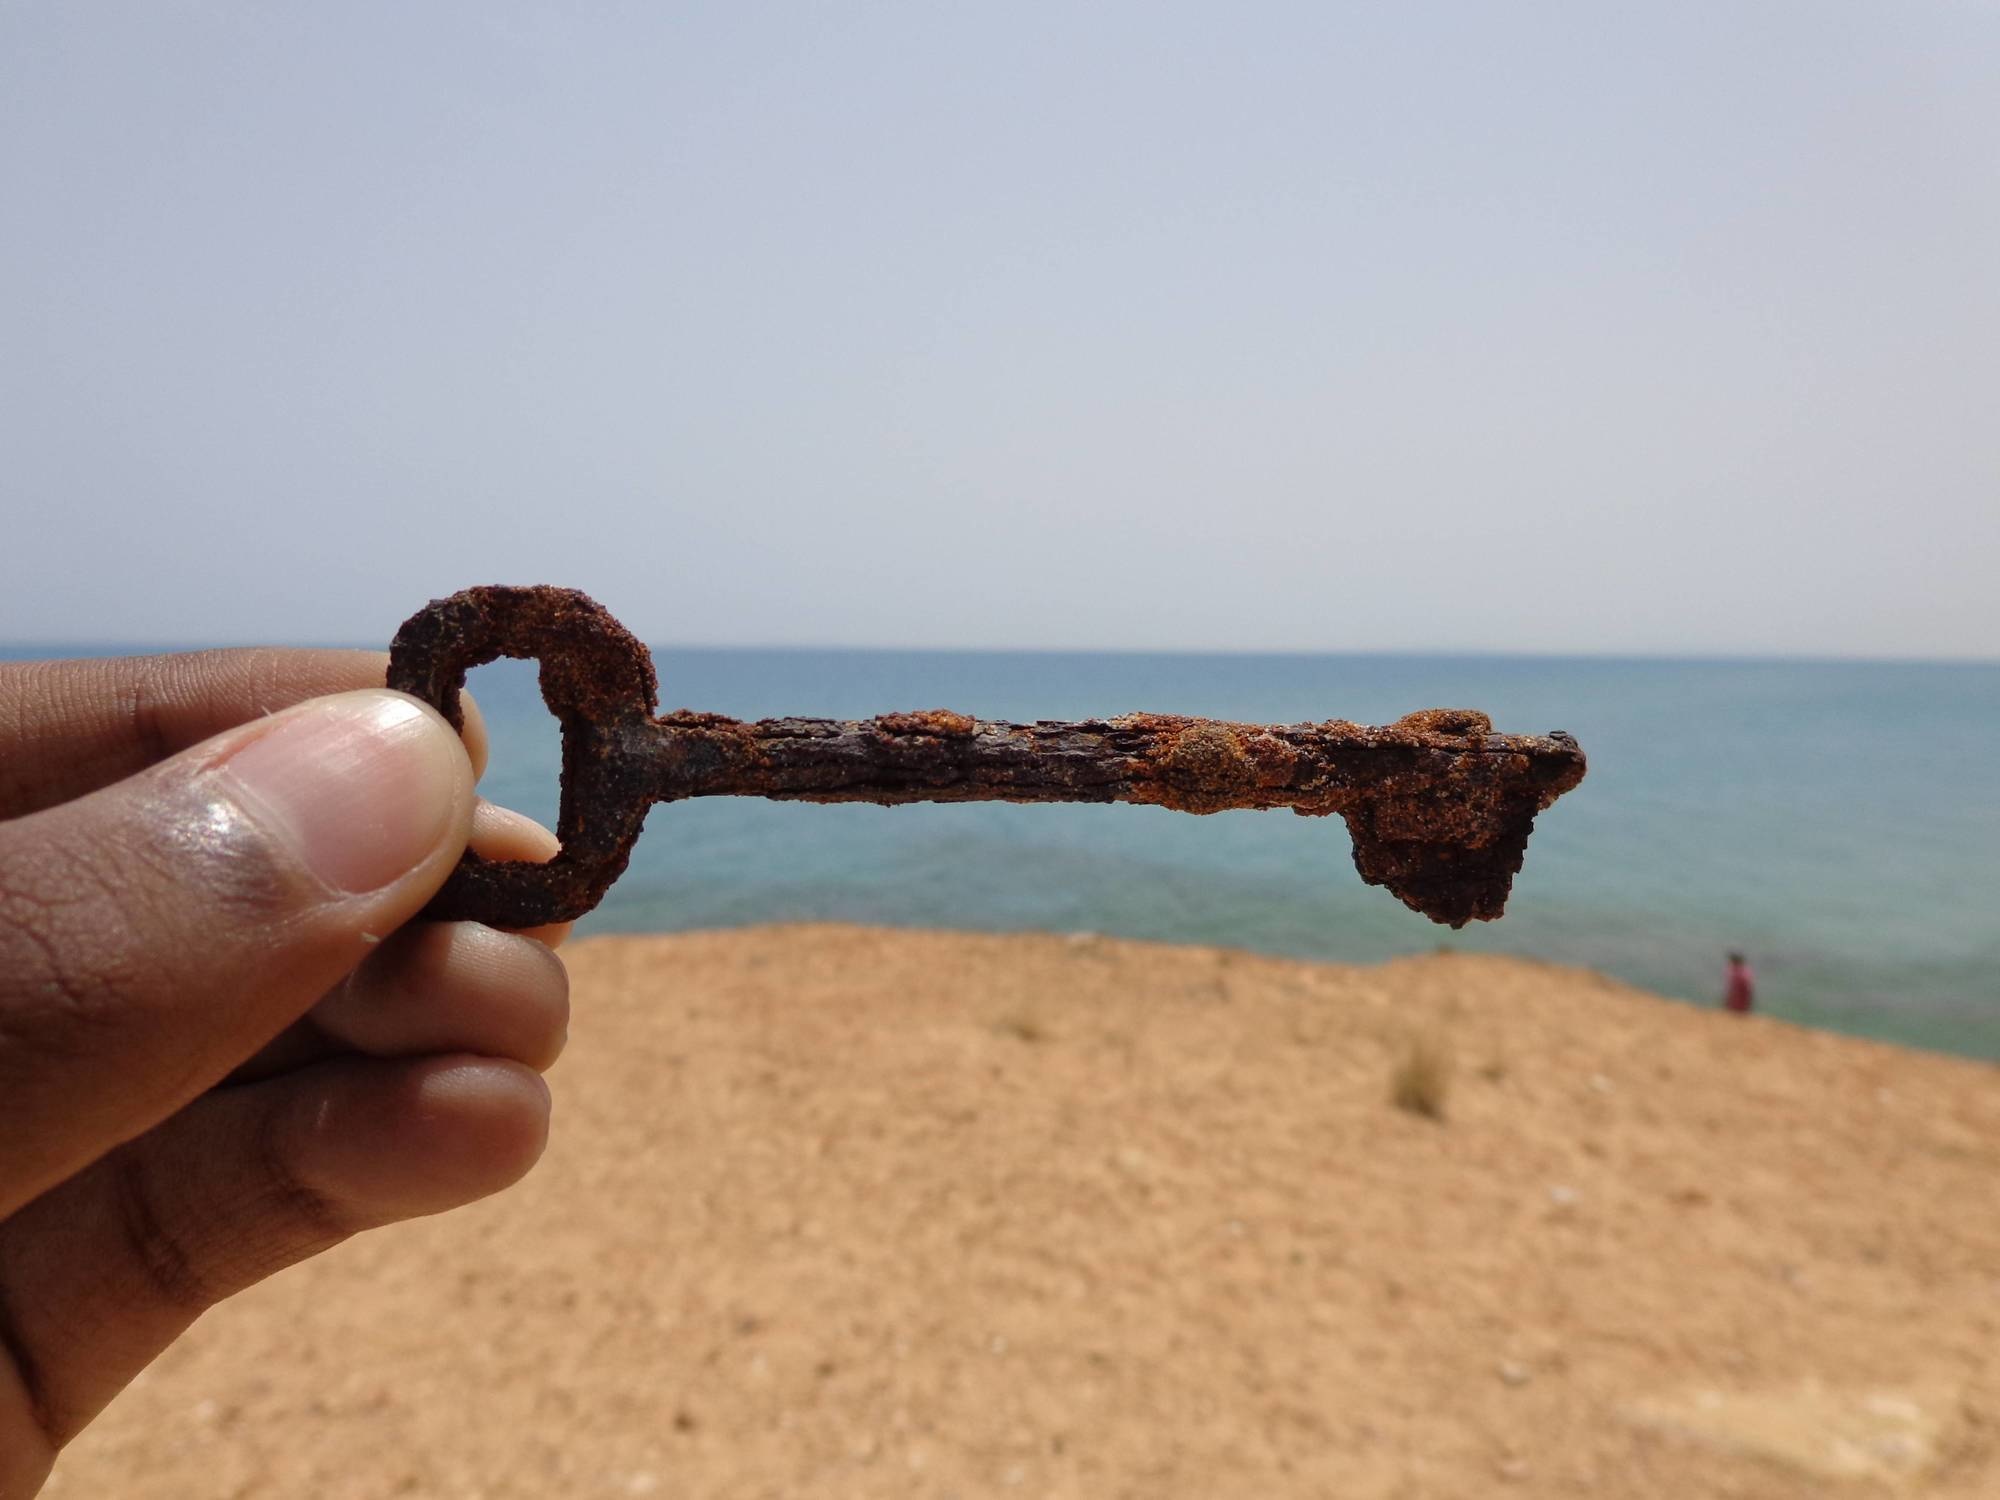 An old rusted key found in Bizerte, Tunisia